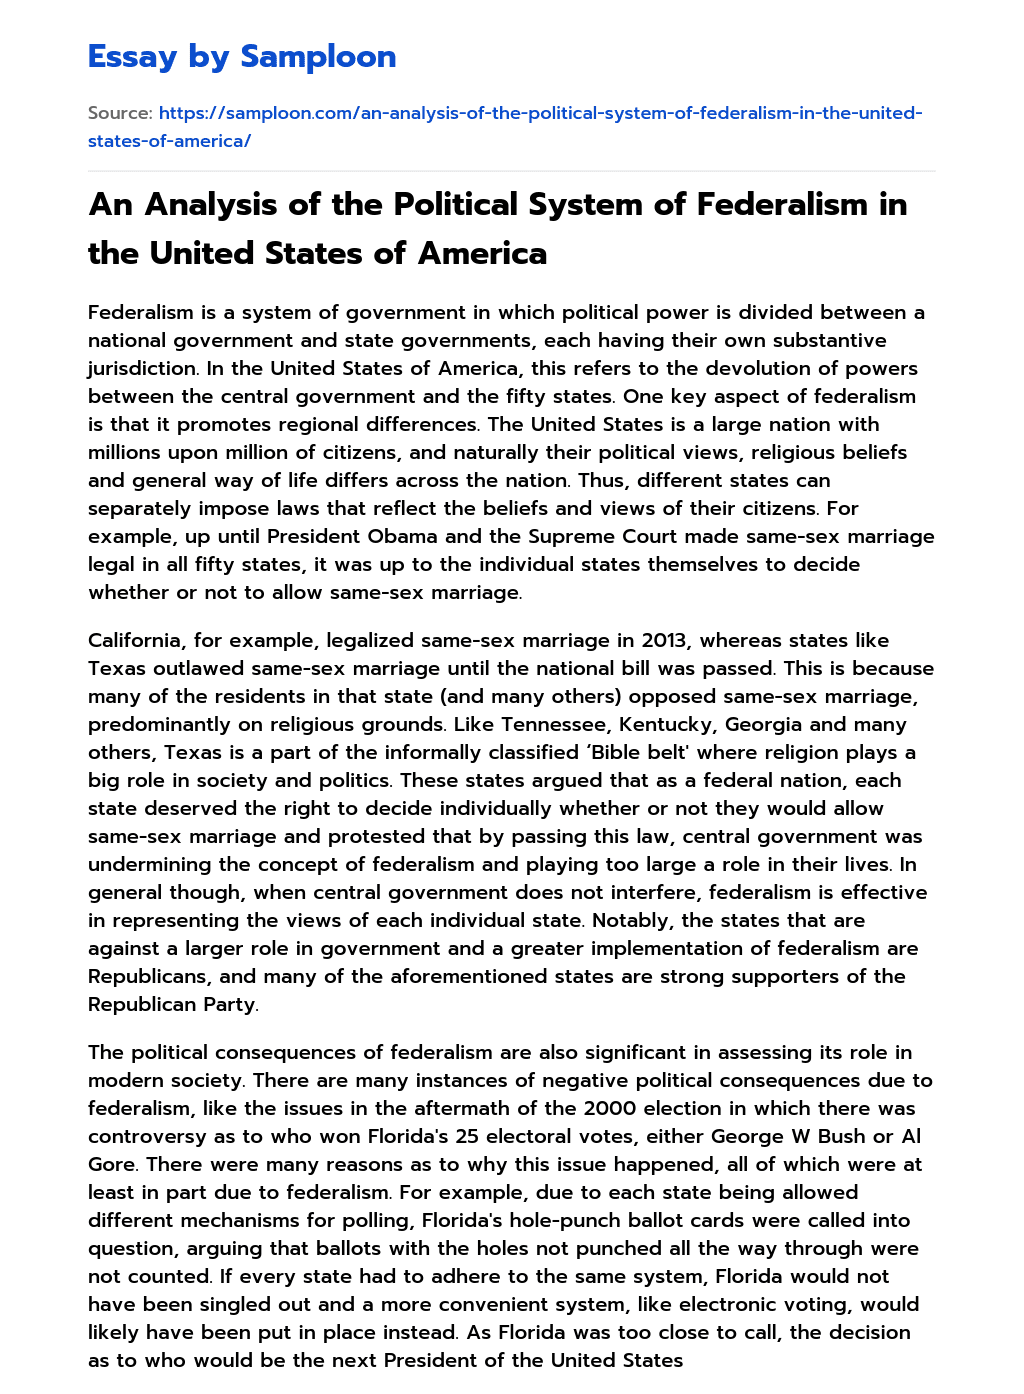 An Analysis of the Political System of Federalism in the United States of America essay